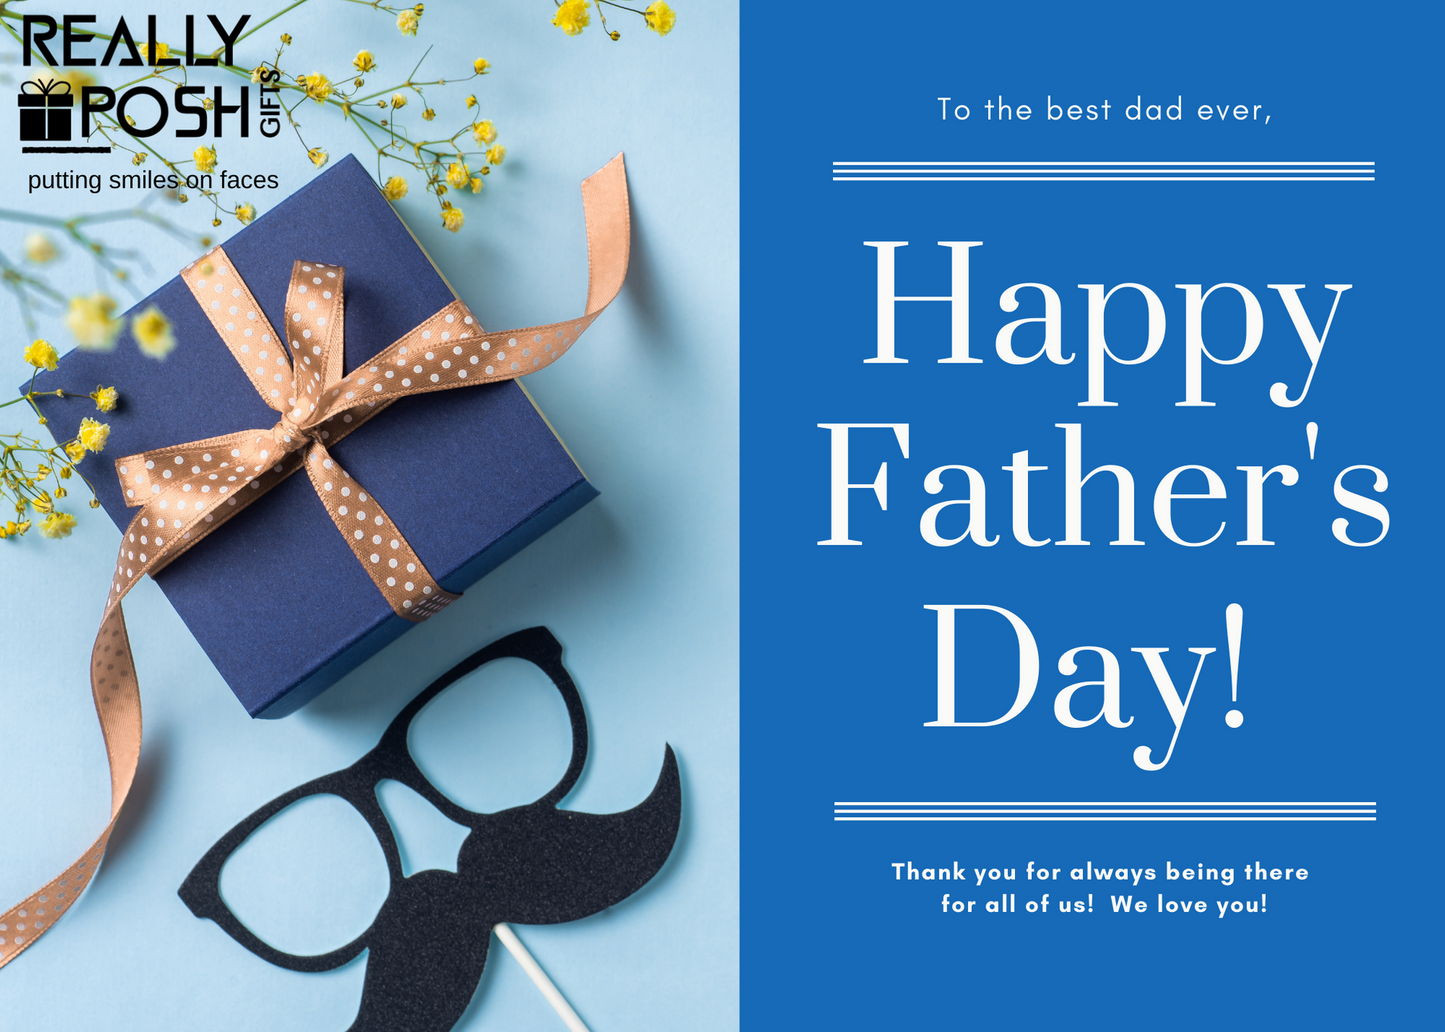 Happy Fathers Day E-Gift Card. 7in by 5in E Gift Card. Greeting Card E-Gift Card for Men